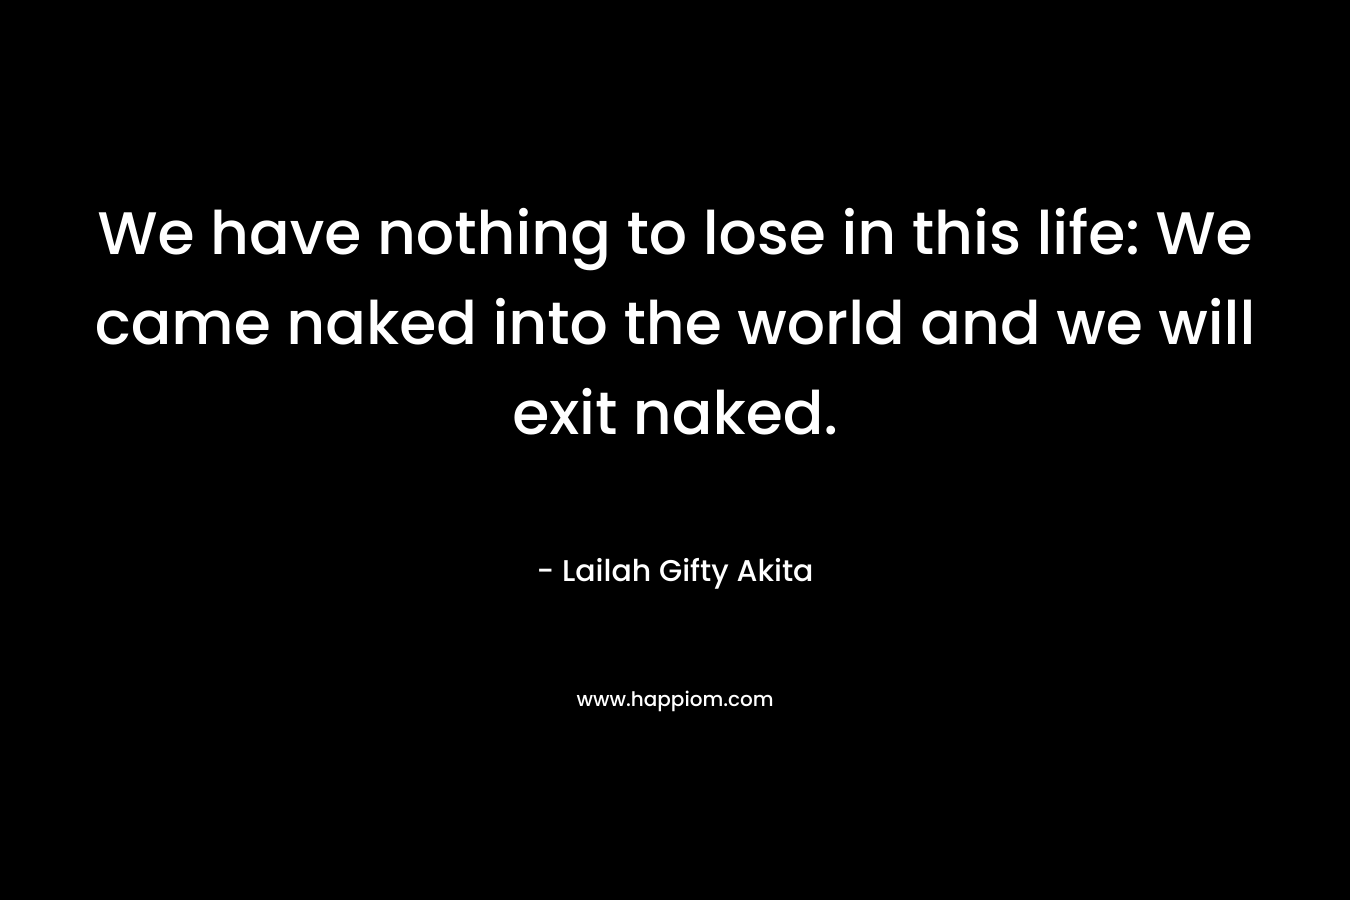 We have nothing to lose in this life: We came naked into the world and we will exit naked.